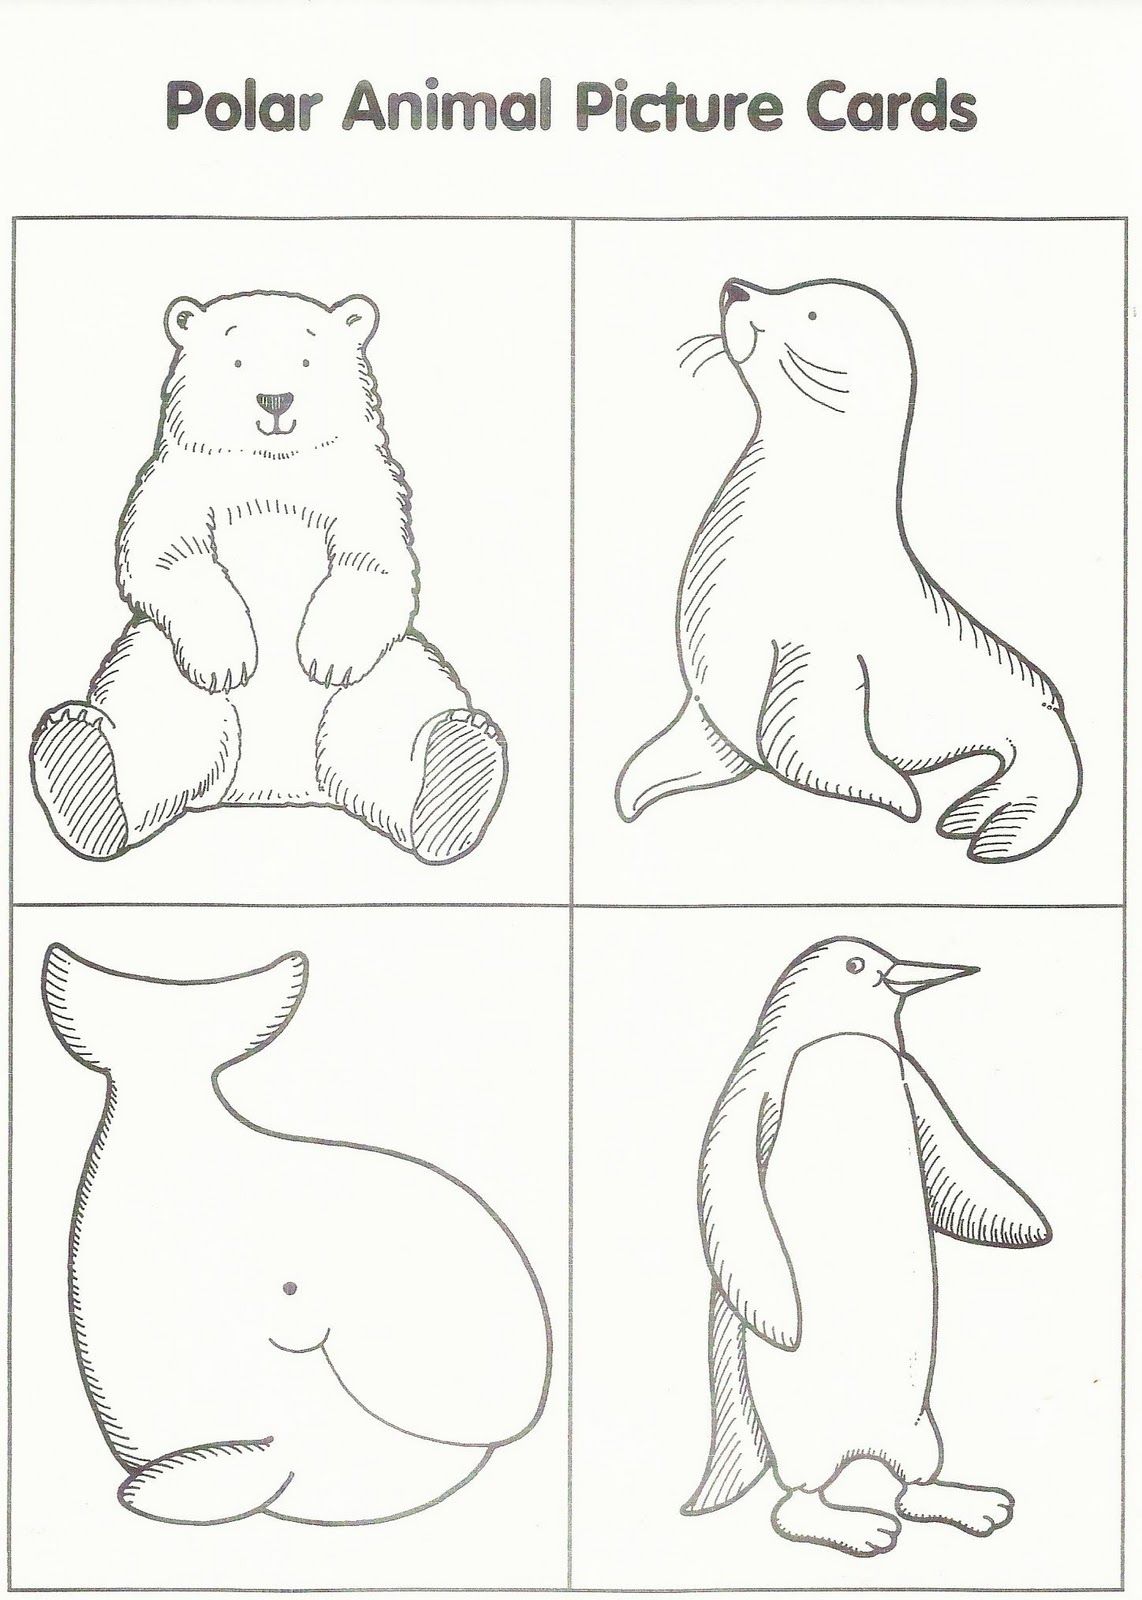 Amazing Arctic Animals Coloring Pages Pdf - Printable Arctic Animals Coloring Pages